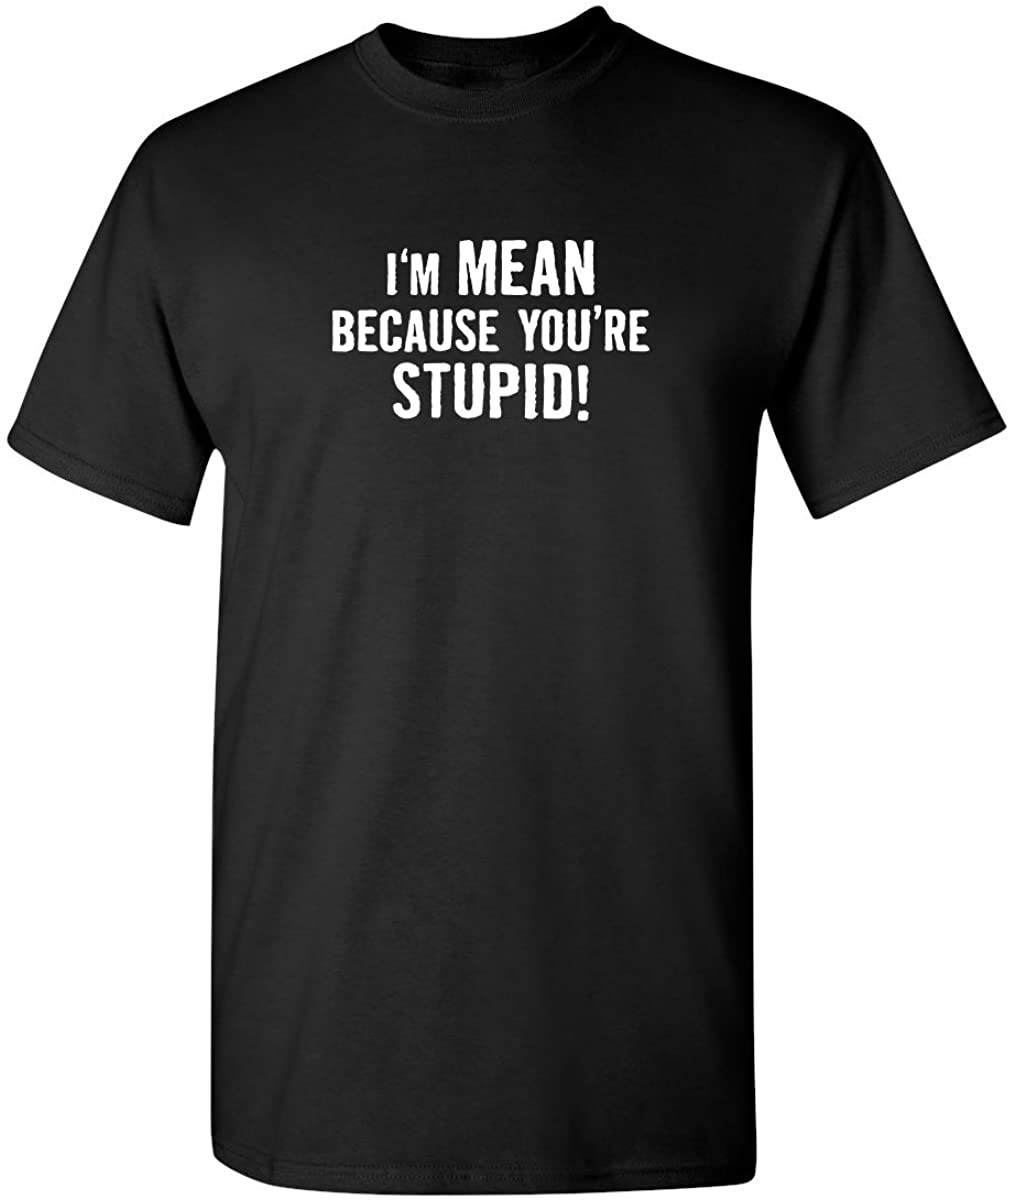 I'm Mean Because You're Stupid Offensive Rude T-Shirt